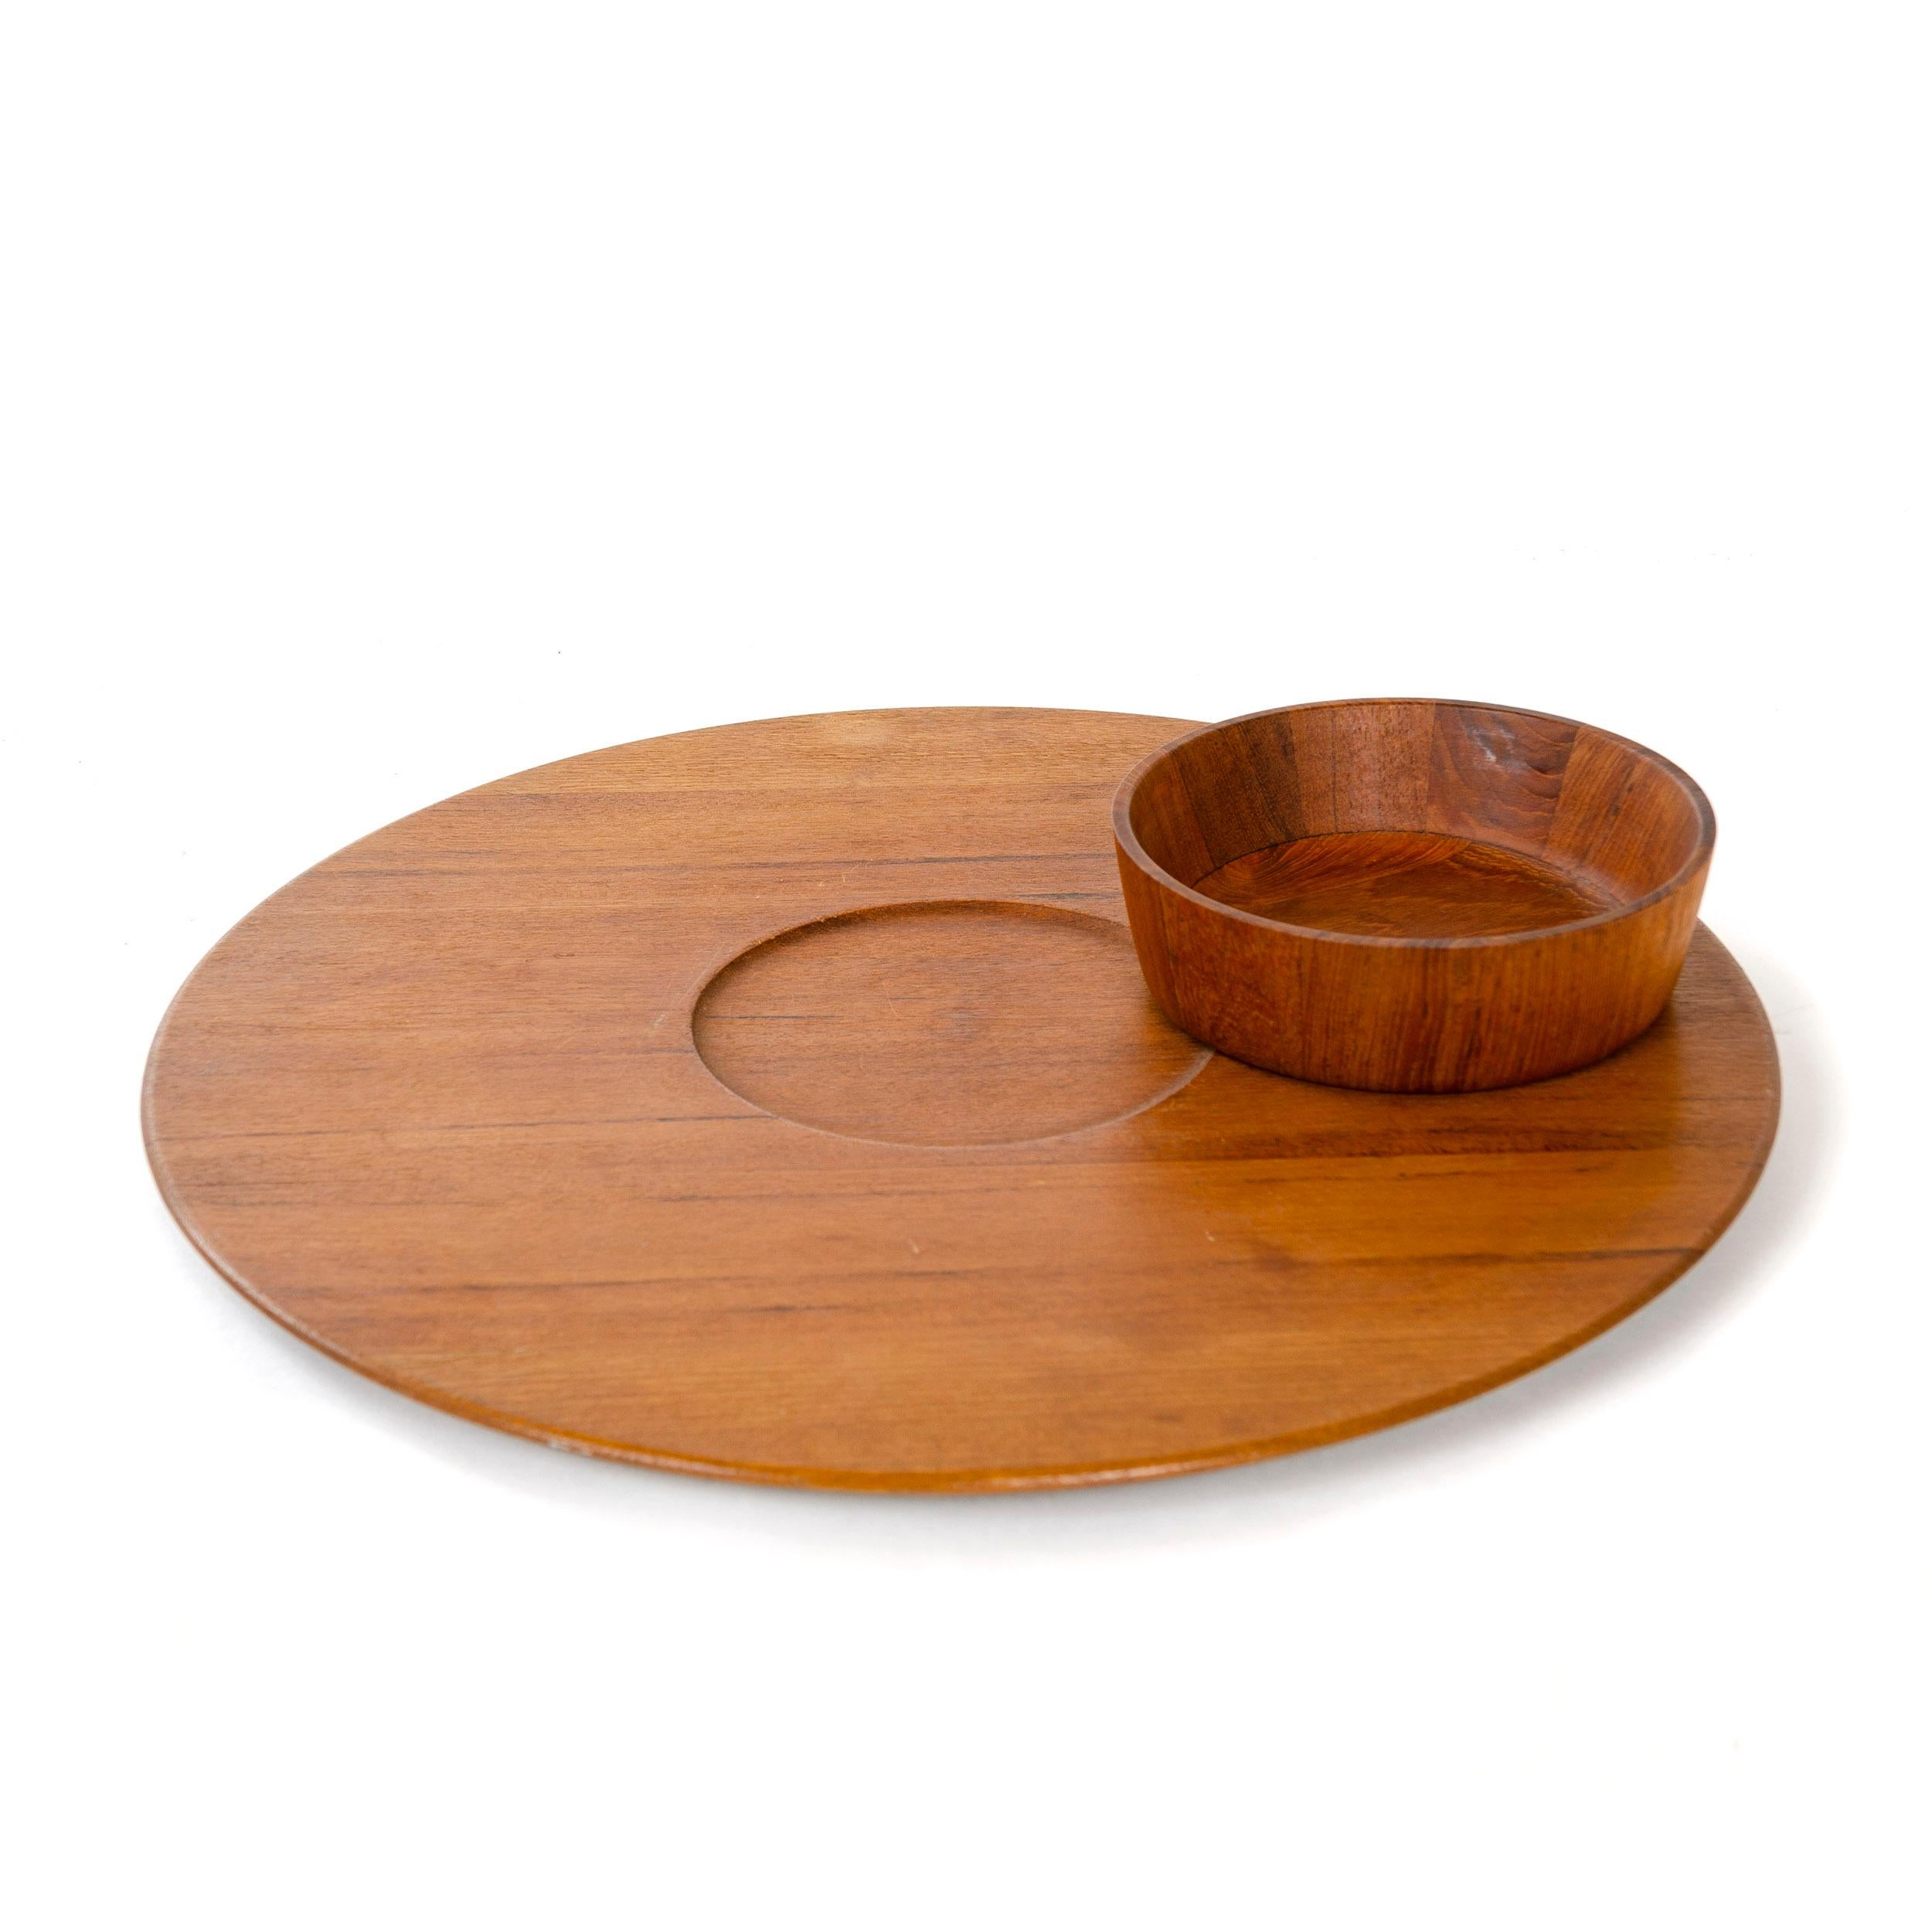 A teak platter with recessed middle and rail feet and accompanying staved teak bowl.